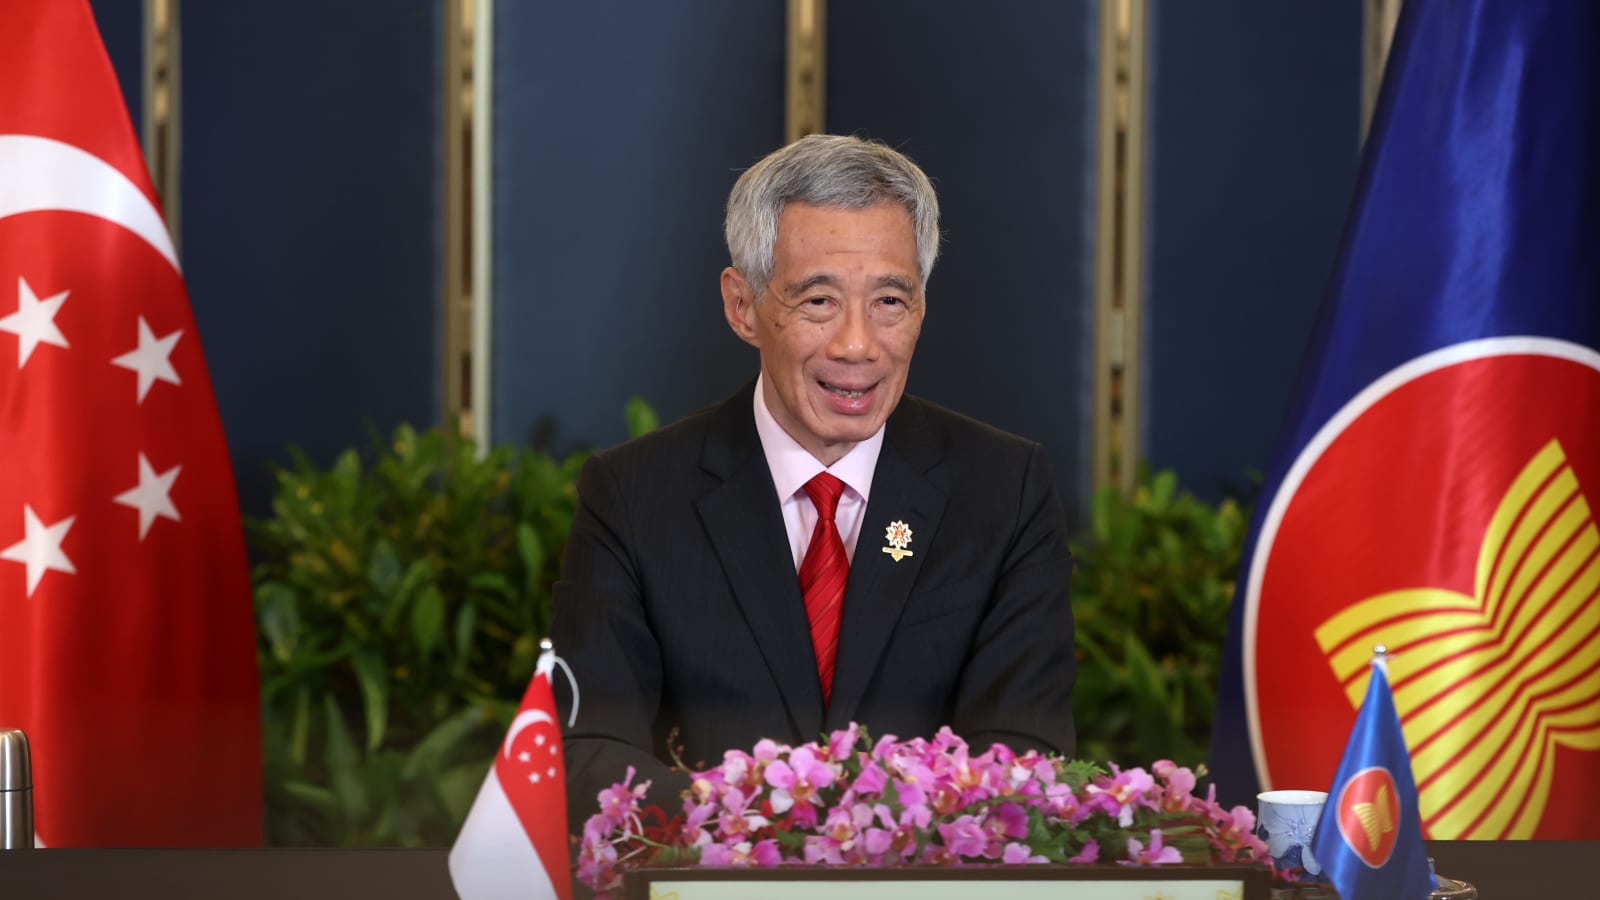 pm-lee-attends-asean-summits-in-cambodia,-first-to-be-held-in-person-since-covid-19